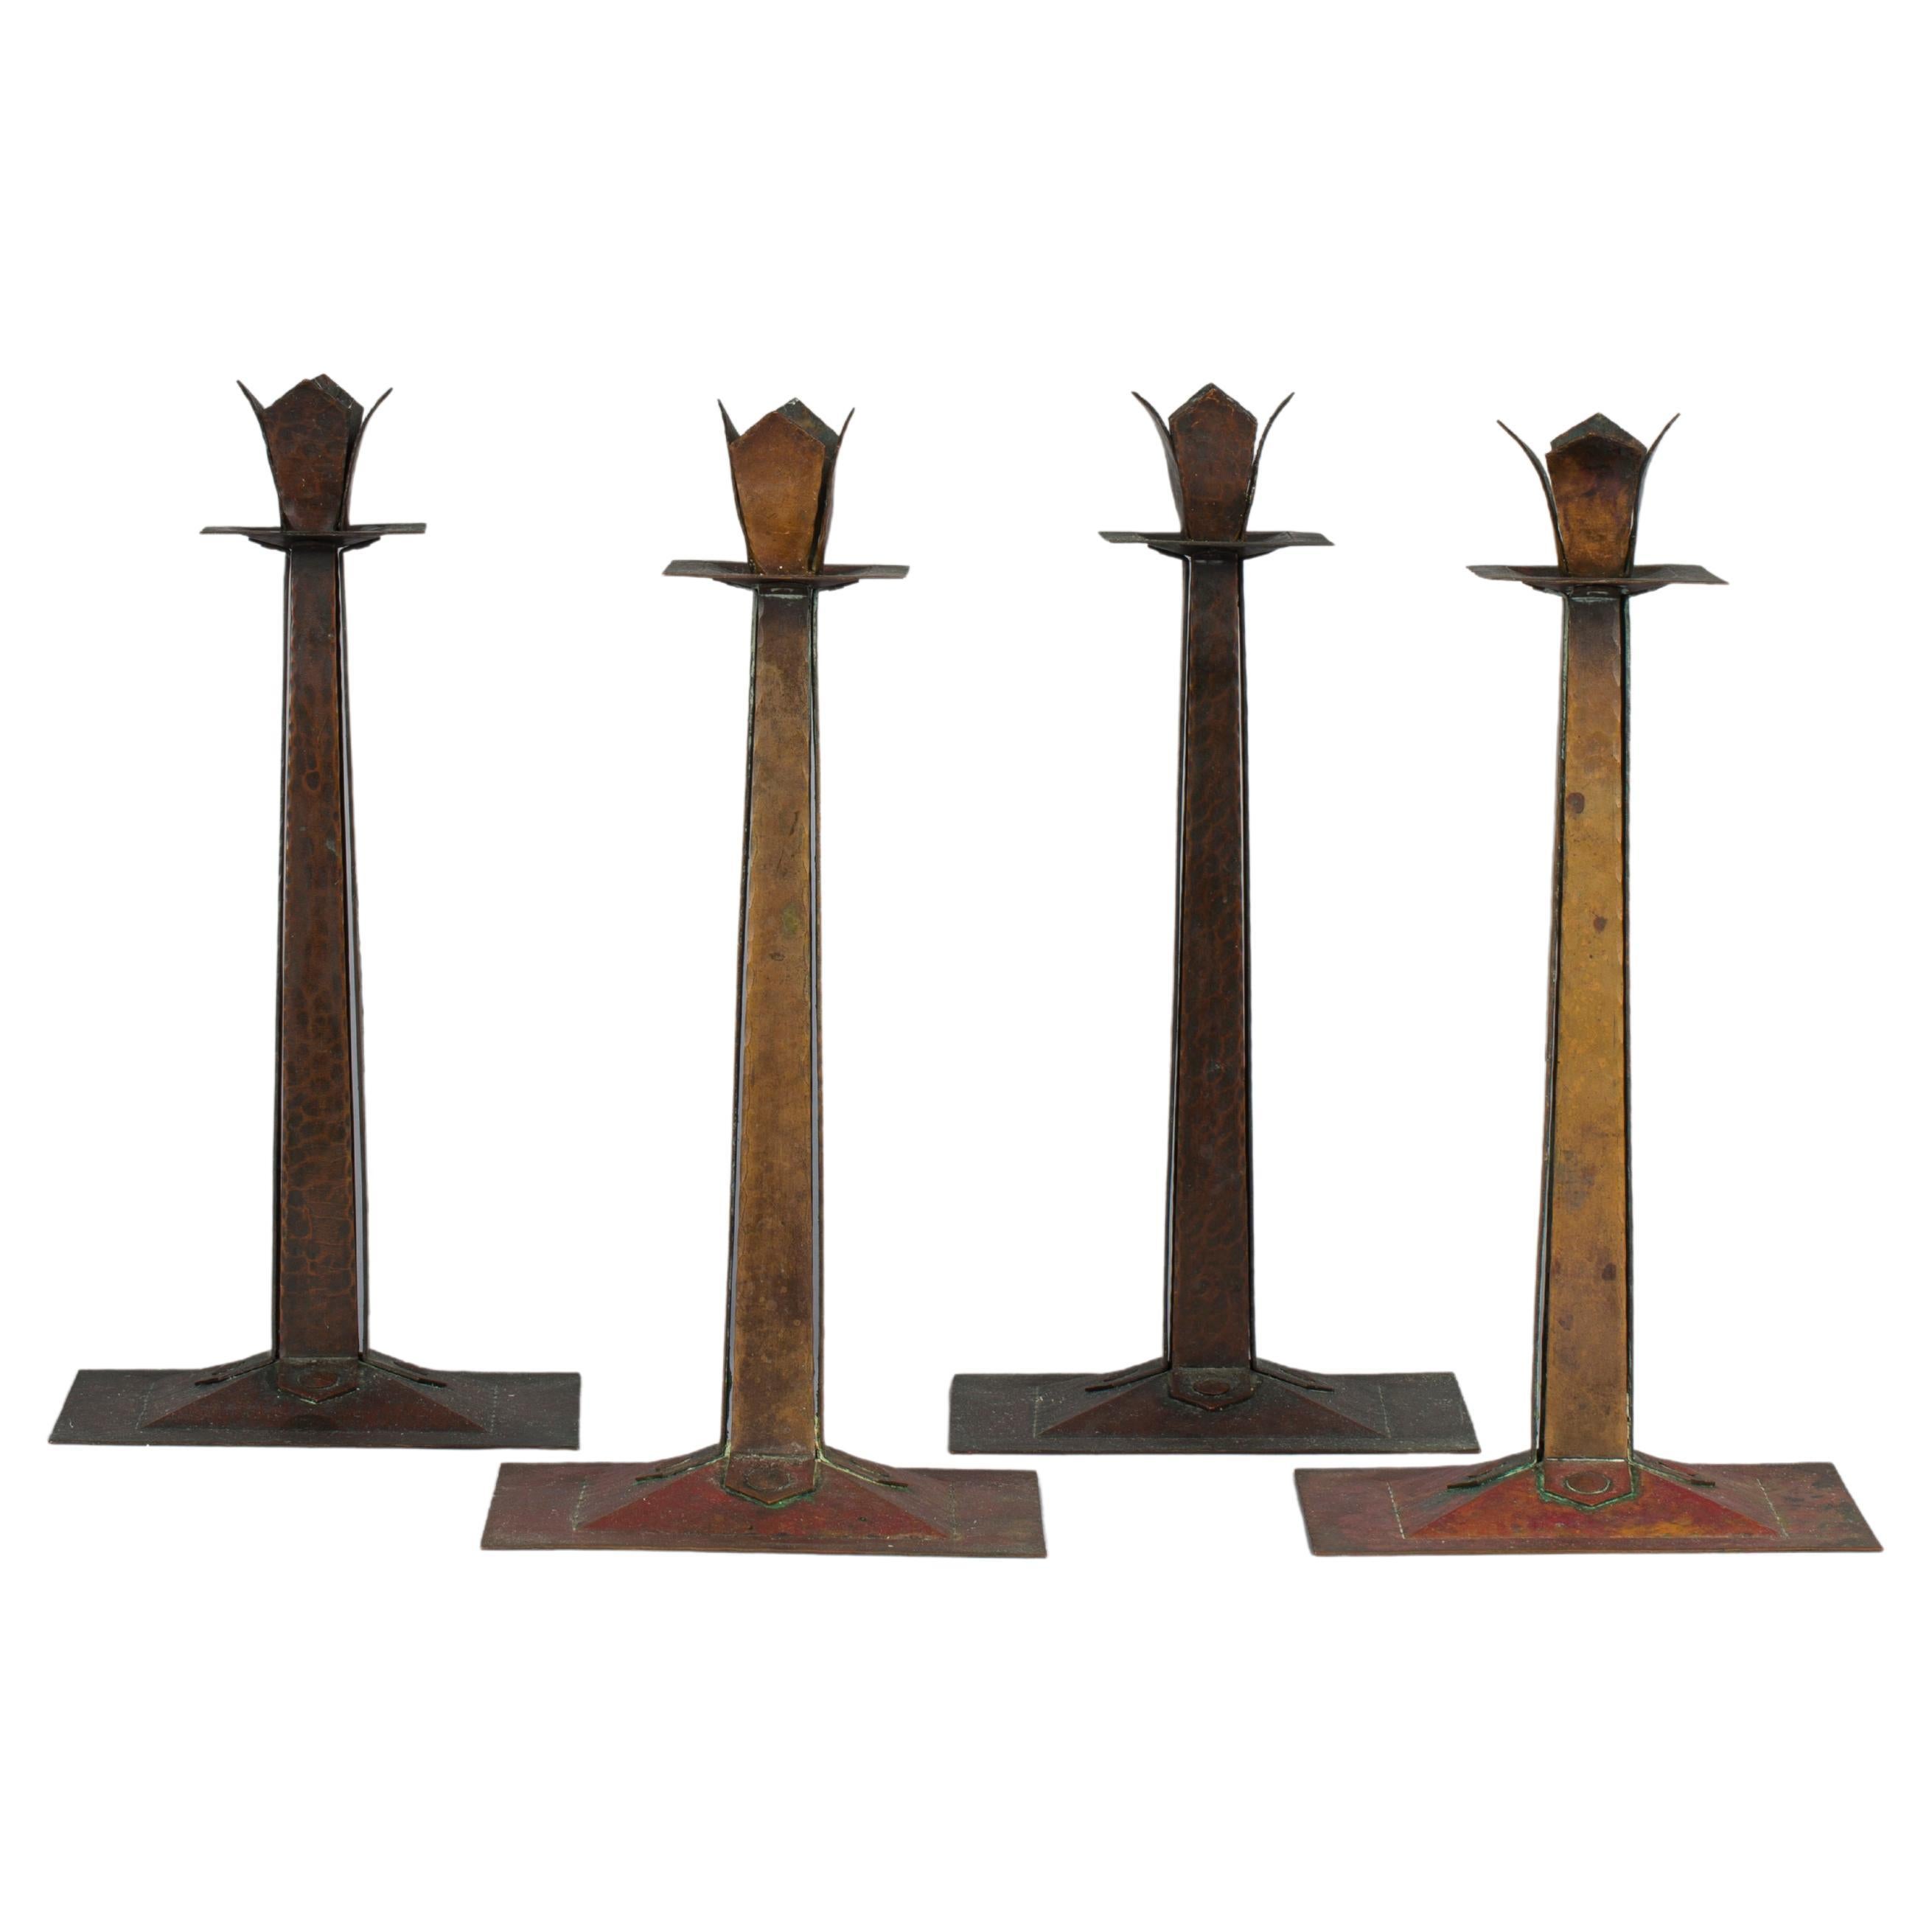 Set of Four Handwrought Copper Candlesticks by Gustav Stickley, circa 1905